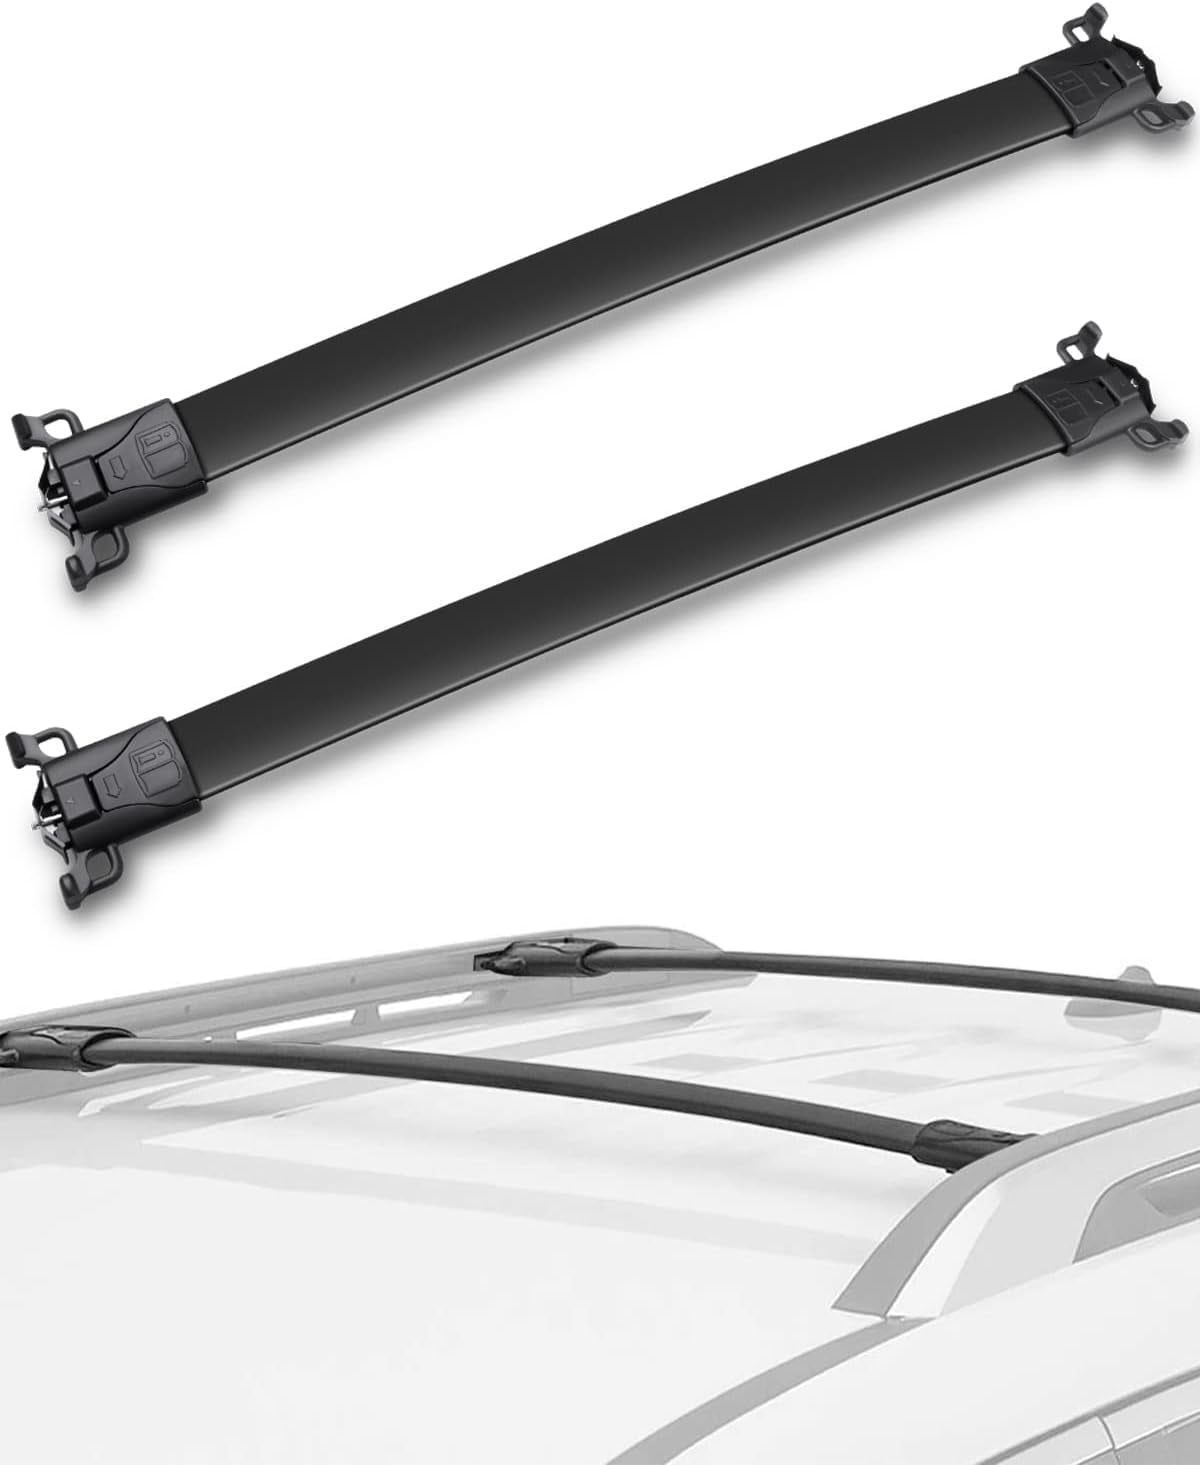 SCITOO Roof Rack Cross Bars Baggage Carrier For Chevrolet Traverse  2009-2017 Black 2 Pcs Roof Top Rack Luggage Carrier W/O C Channel